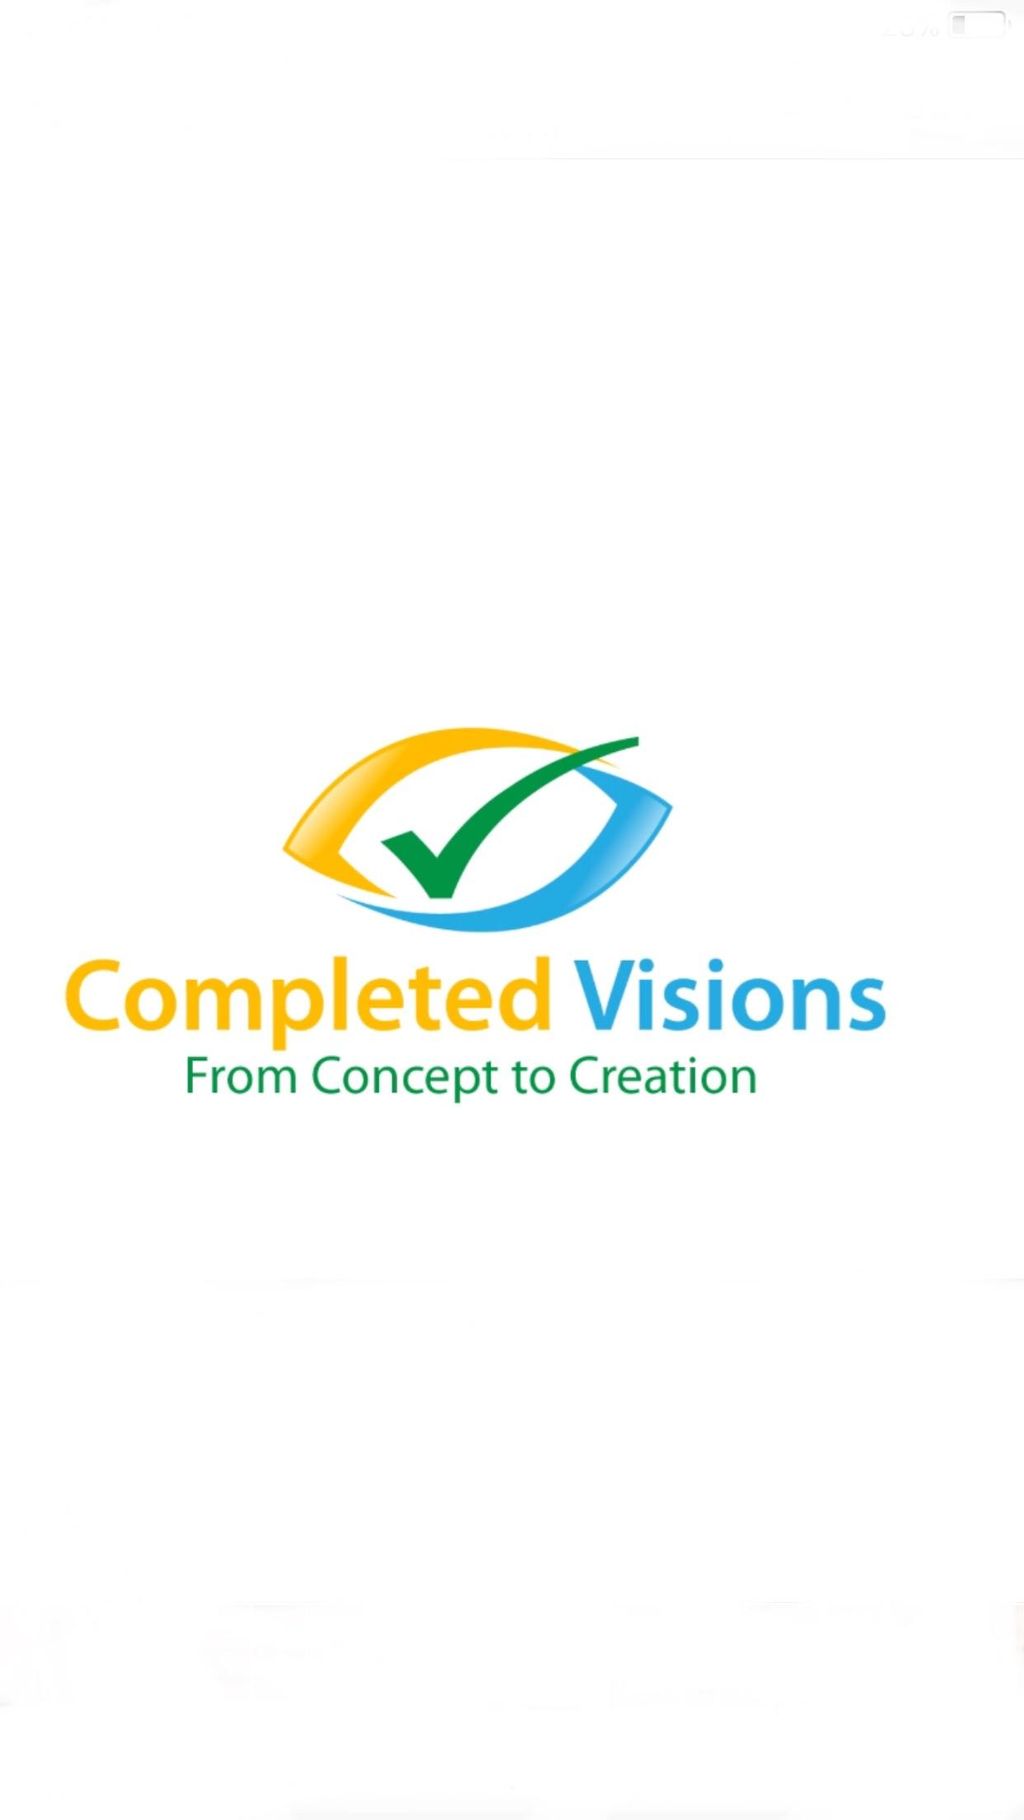 Completed Visions, LLC